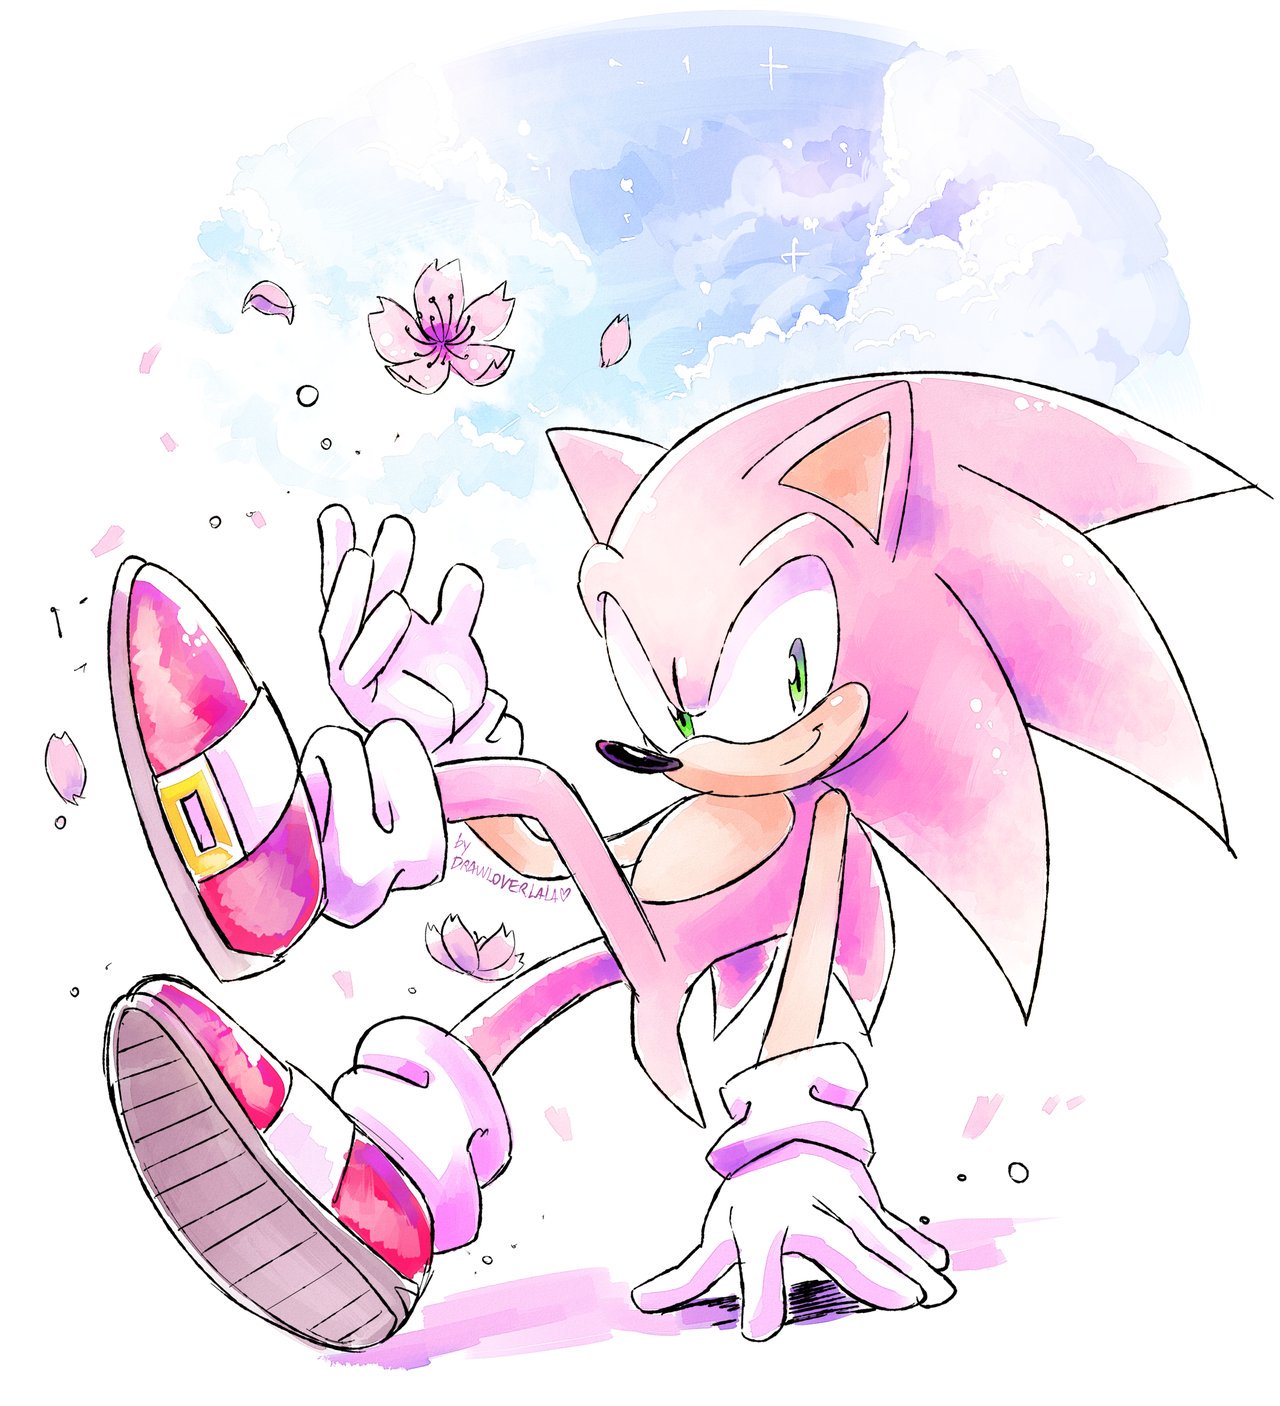 Pamela Ojeda on Twitter: "🌸the Pink Sonic trend is cute so i also drew